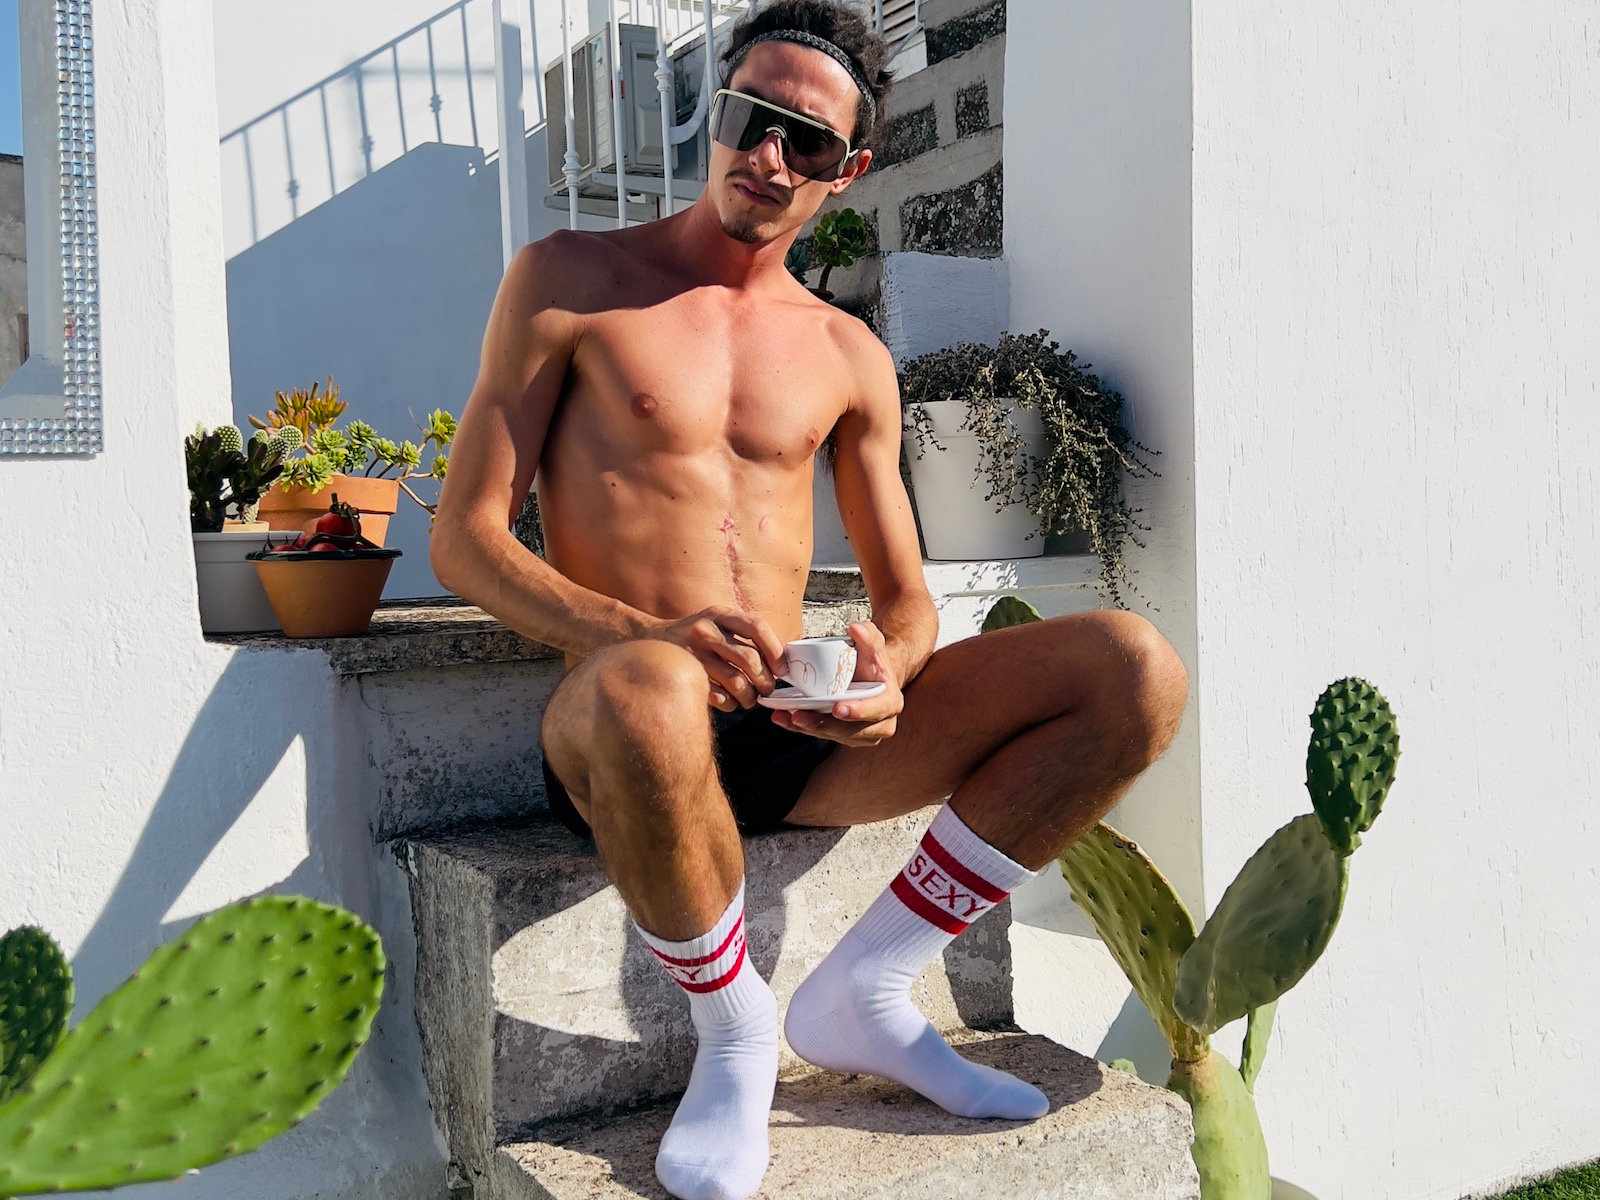 Gay hot guy in underwear and socks that say "sexy" sitting on some steps having coffee.